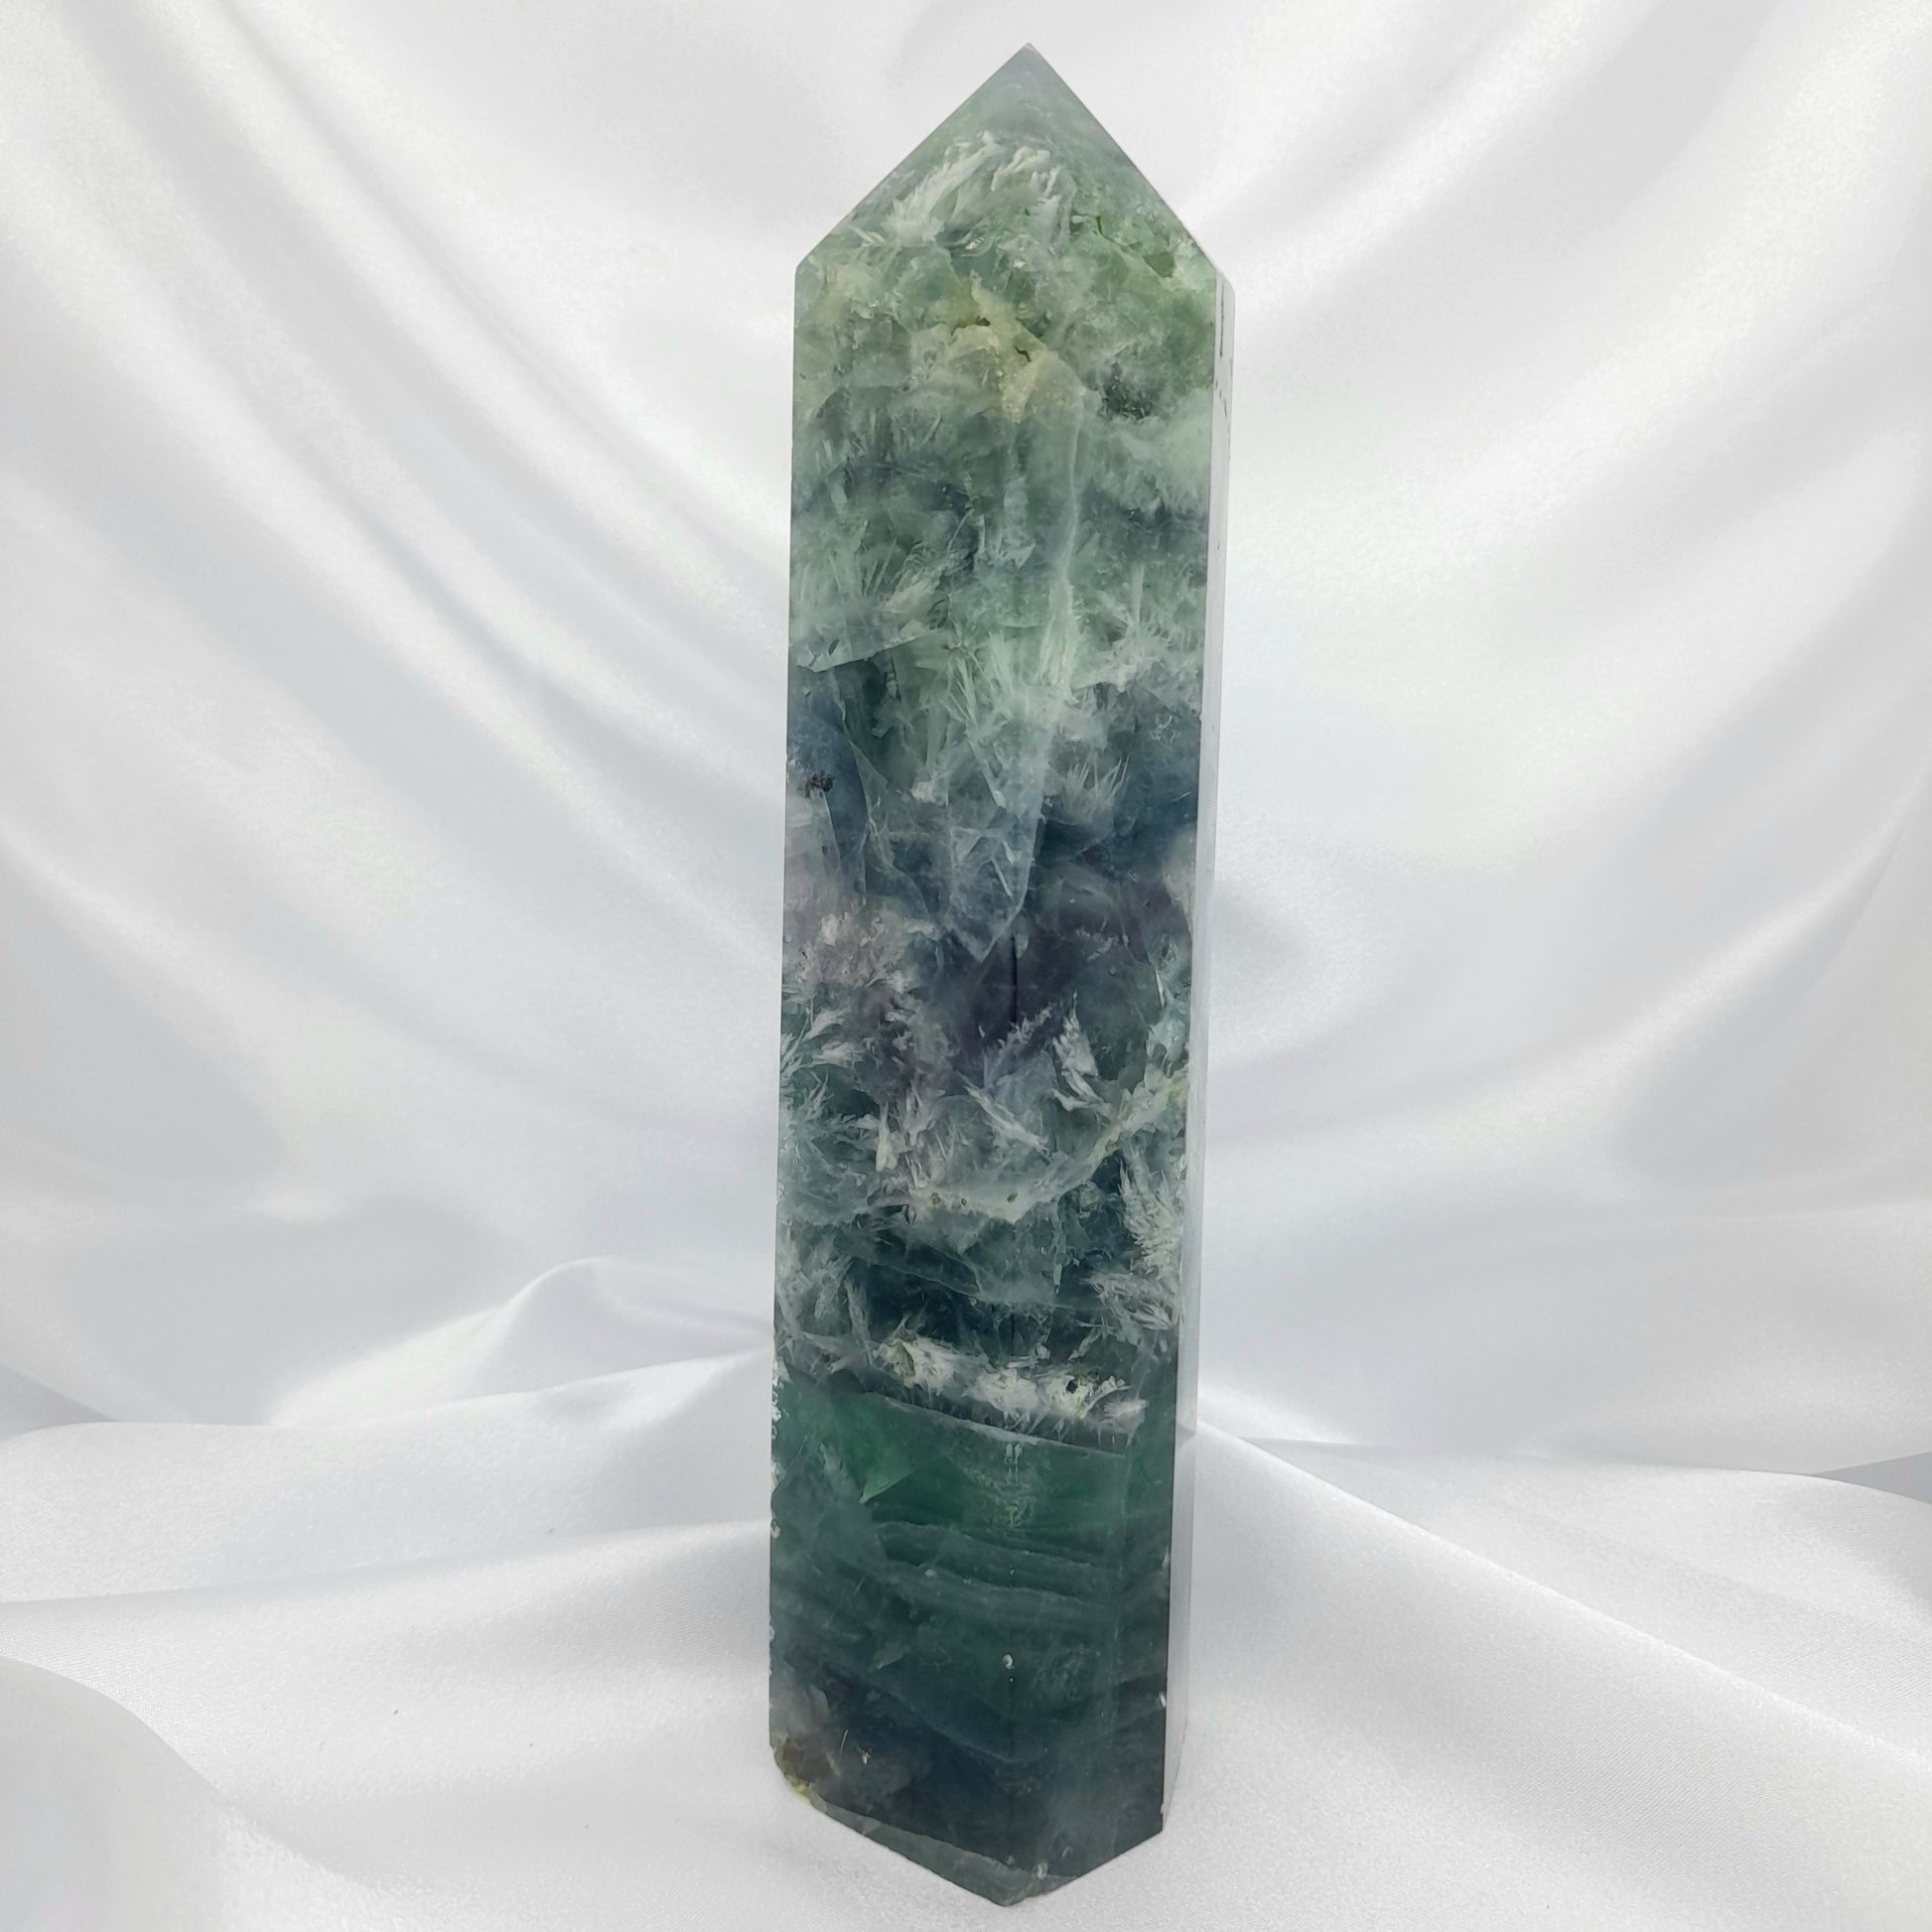 Fluorite Large Tower: A majestic crystal standing roughly 20cm tall and weighing 925g. Known for its balancing energy and transformative properties, Fluorite brings positivity and enlightenment into your space. This special piece features gorgeous druzies and flashy rainbows, making it a unique and visually stunning addition to your collection.